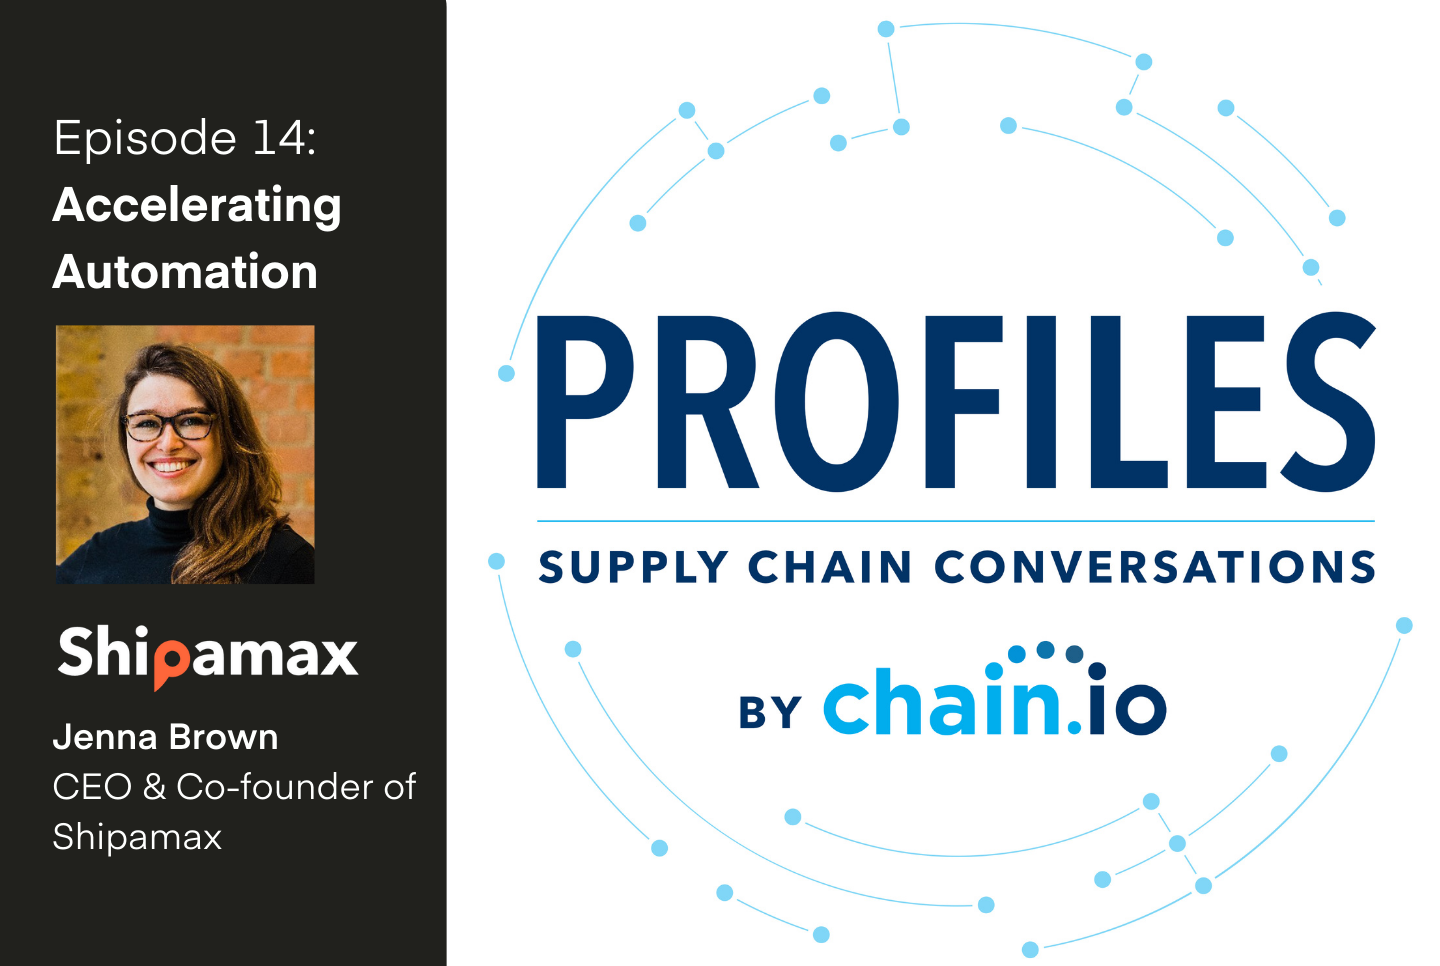 Jenna Brown, CEO & Co-Founder of Shipamax. the fundamental processes and documentation that sits behind the delivery of goods from A to B remains the same. These were never designed with today's scale of shipments in mind.